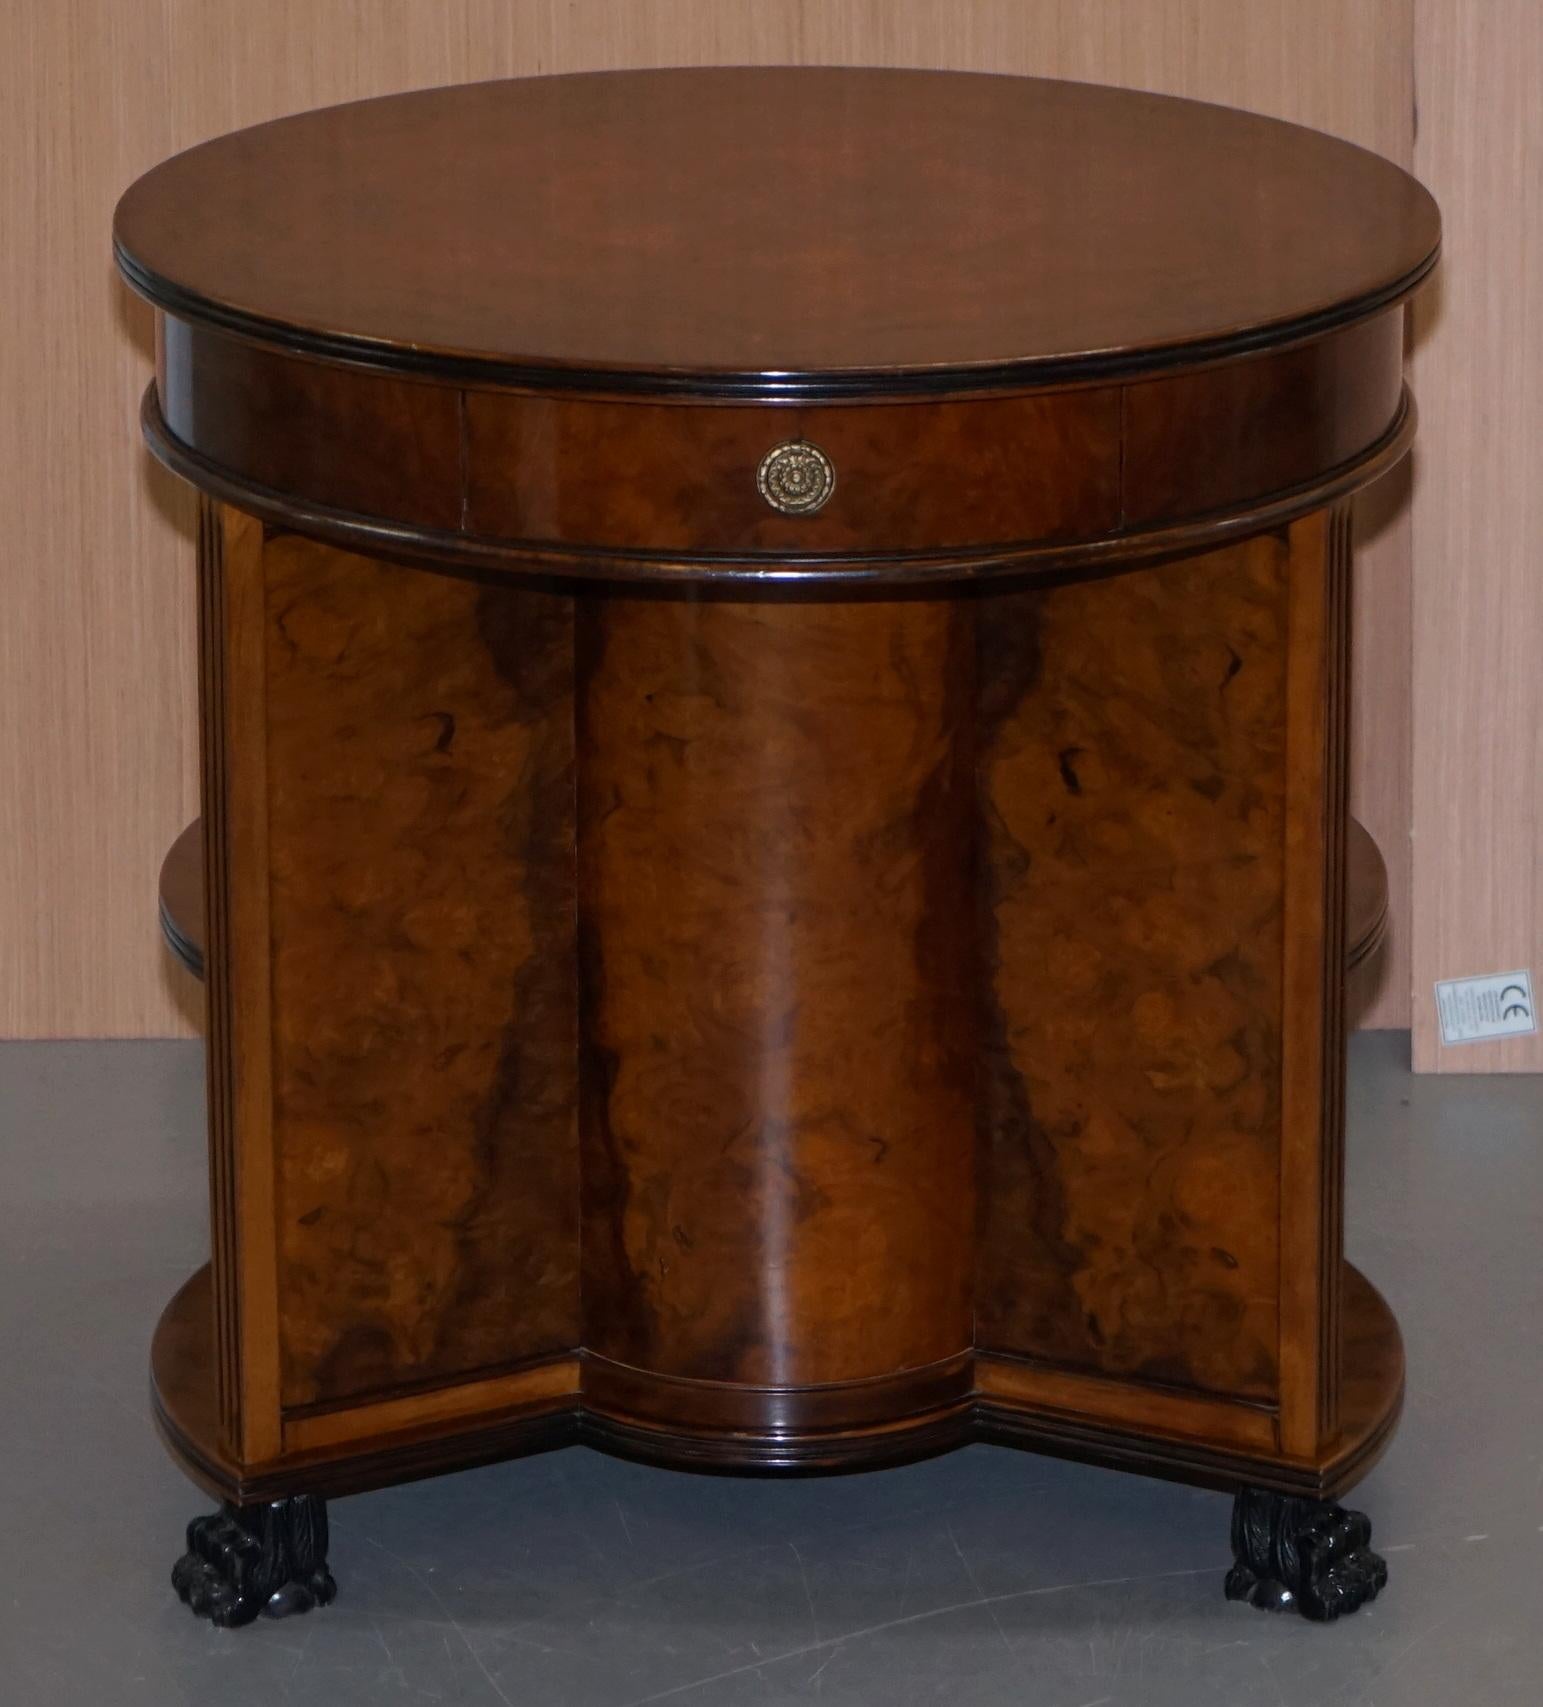 We are delighted to offer for sale this lovely handmade quarter cut burl walnut Regency style round bookcase table with single drawer and Lion Hairy Paw feet

A very good looking and rare piece of furniture, its not often you find a two tier